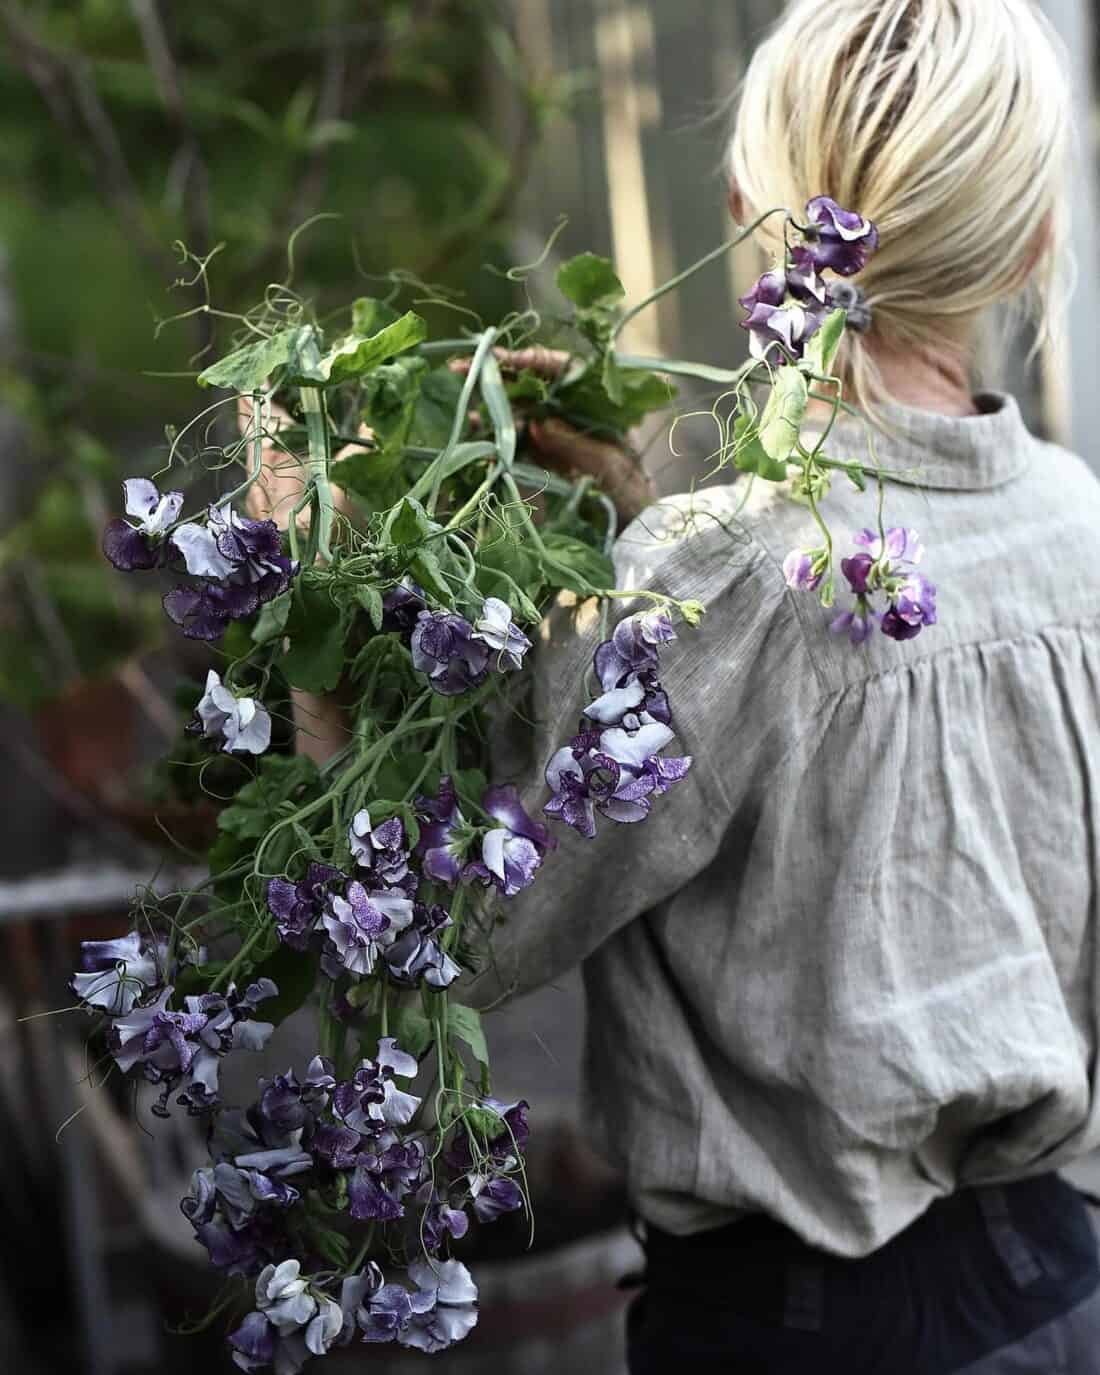 A woman carrying a hanging basket of purple flowers.